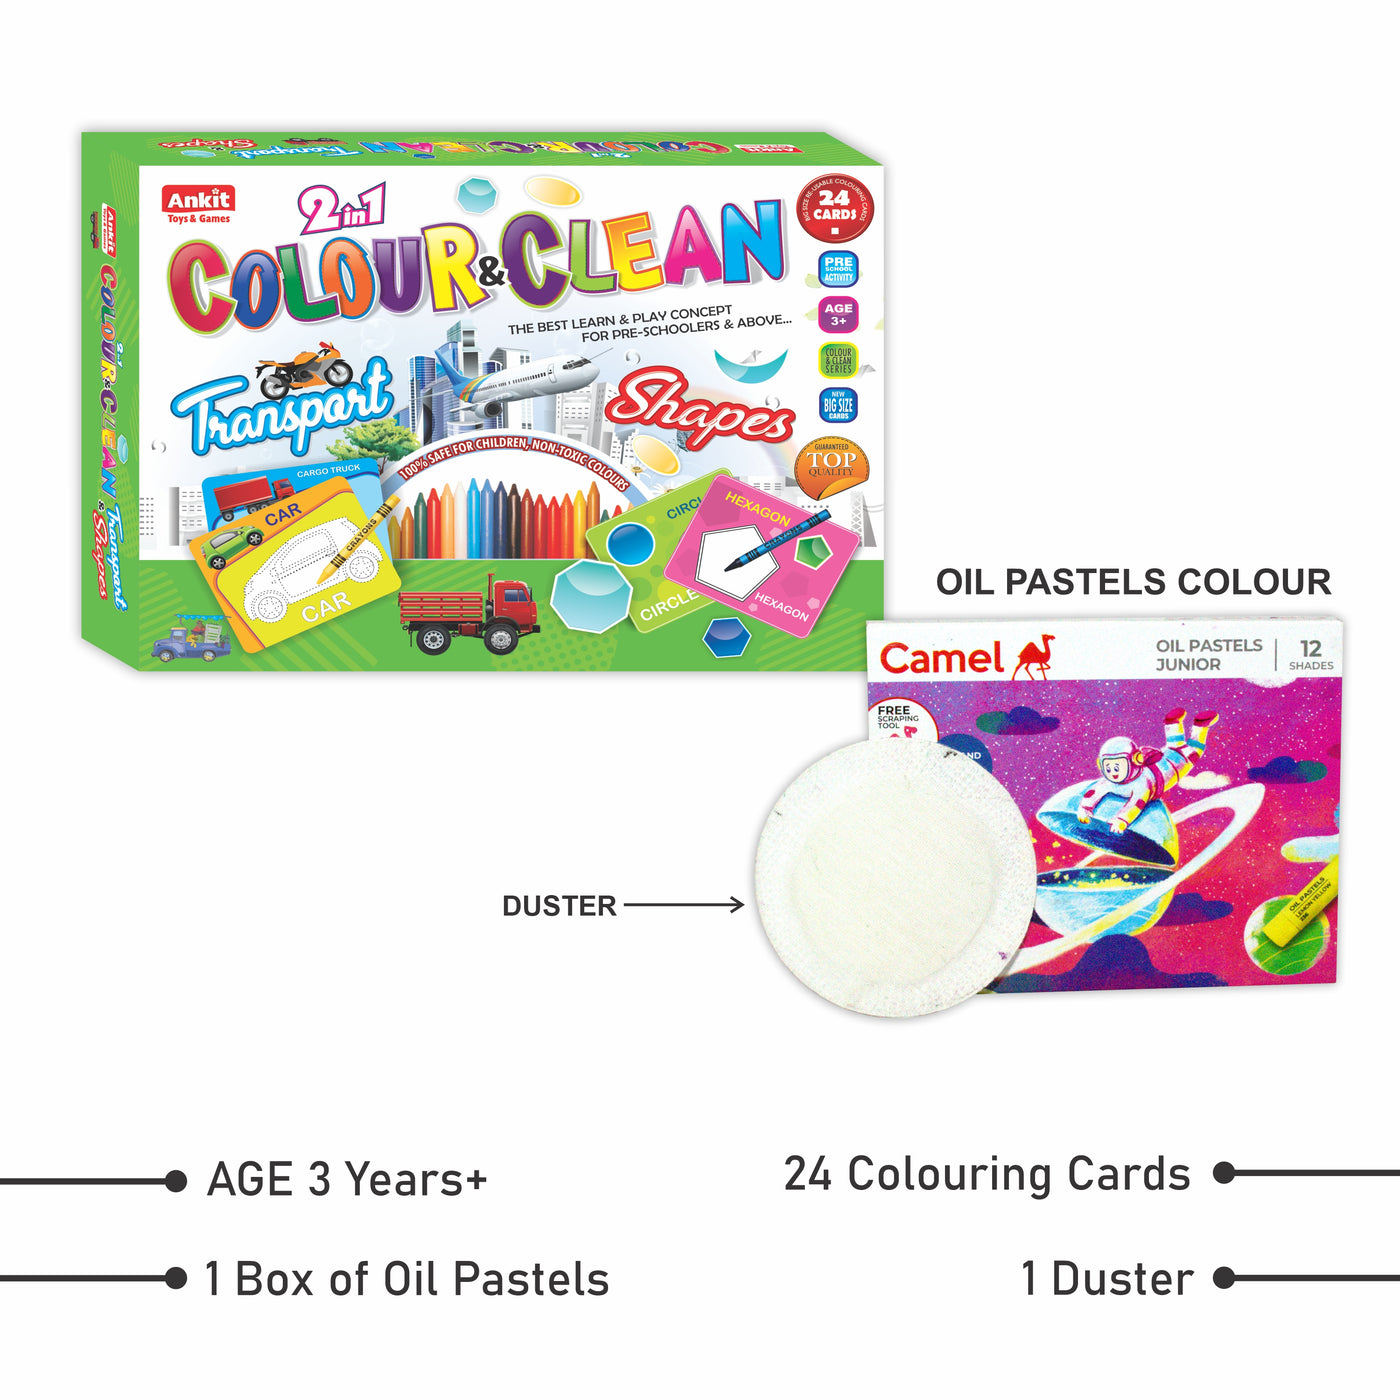 2 in 1 Colour & Clean (Transports + Shapes) - Coloring Cards